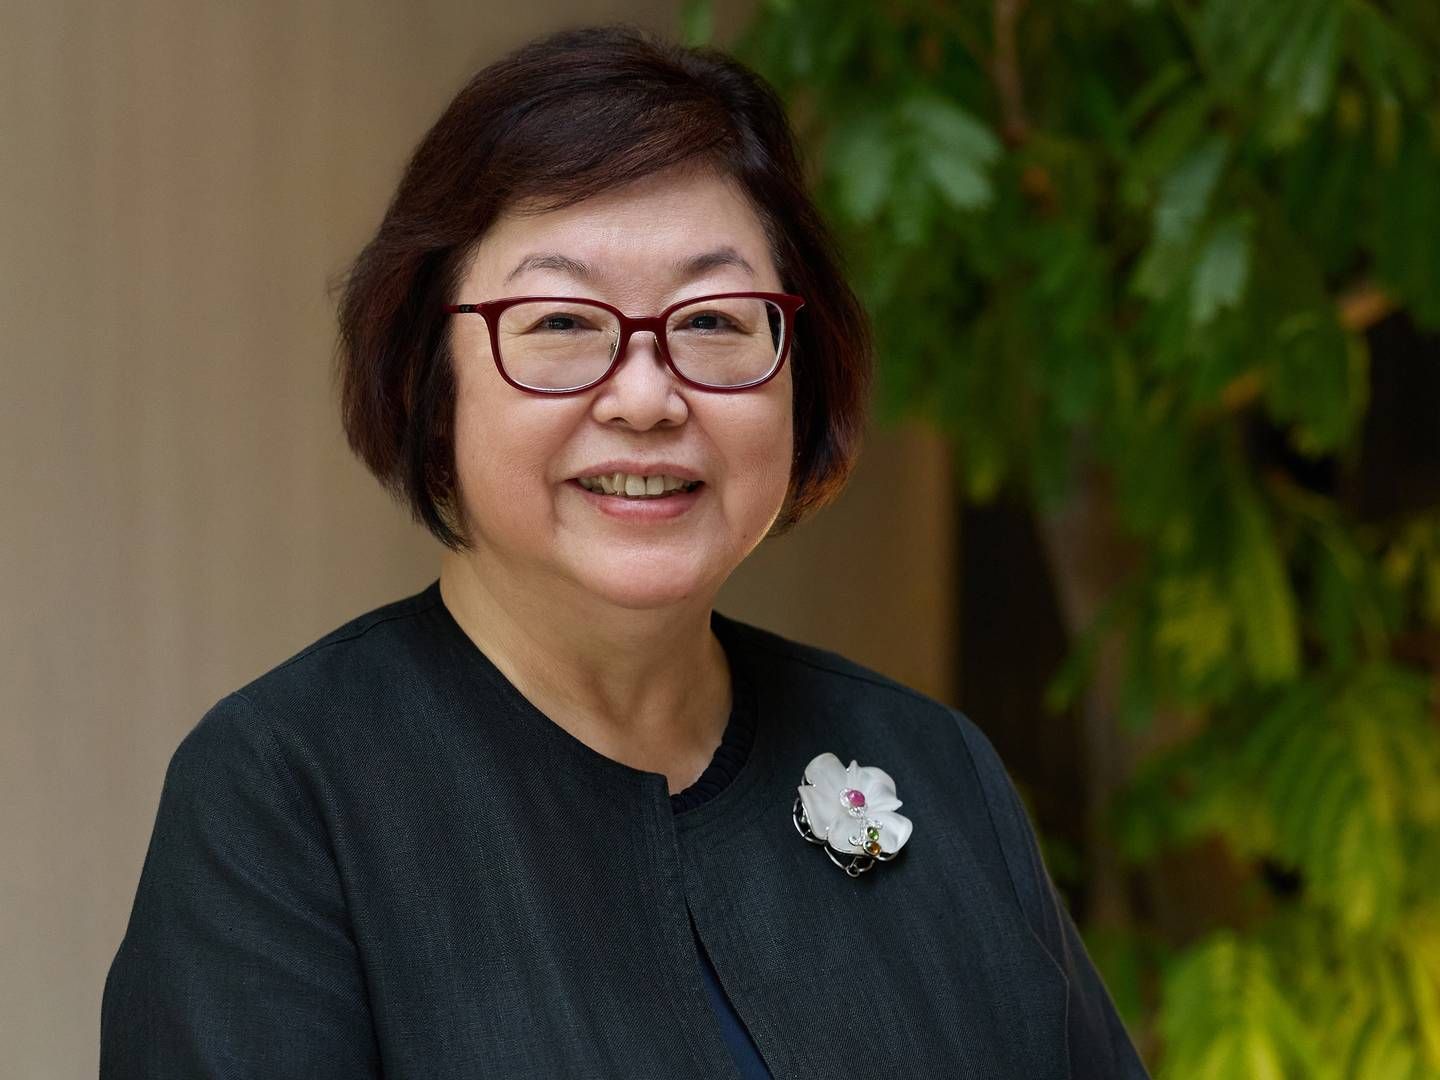 "Shipping is a sector where the relationships formed amongst the community are actually very strong. We become friends, so we laugh together, we joke together. At the same time, when we hear the passing on of a friend, we all feel sad about it," says Executive Director, SMF, Tan Beng Tee | Photo: Celestia Tan